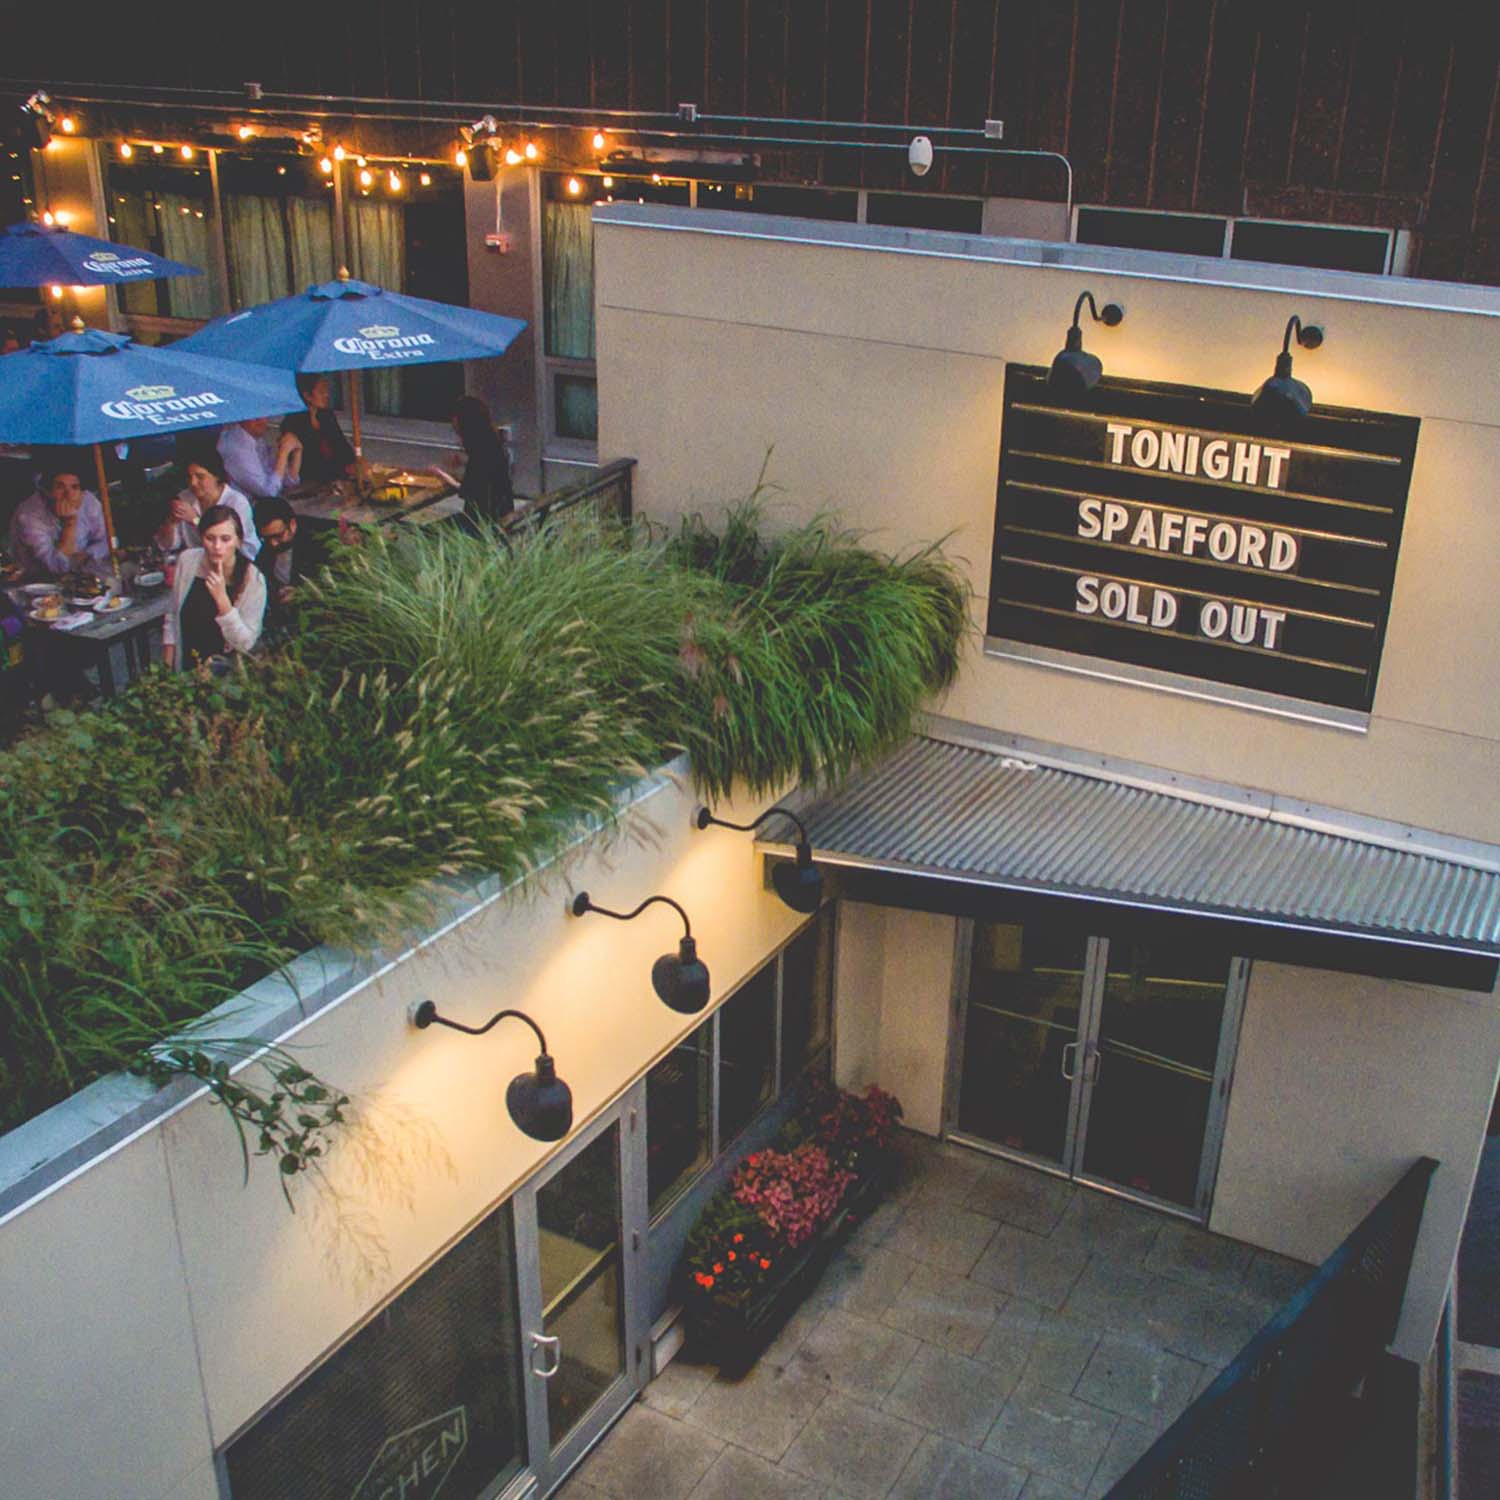 Photo of the Sinclair roofdeck. The marquee on the tan building reads "Tonight Spafford Sold out." To the left, patrons can be seen dining outside at tables with blue Corona umbrellas next to a railing with plants.